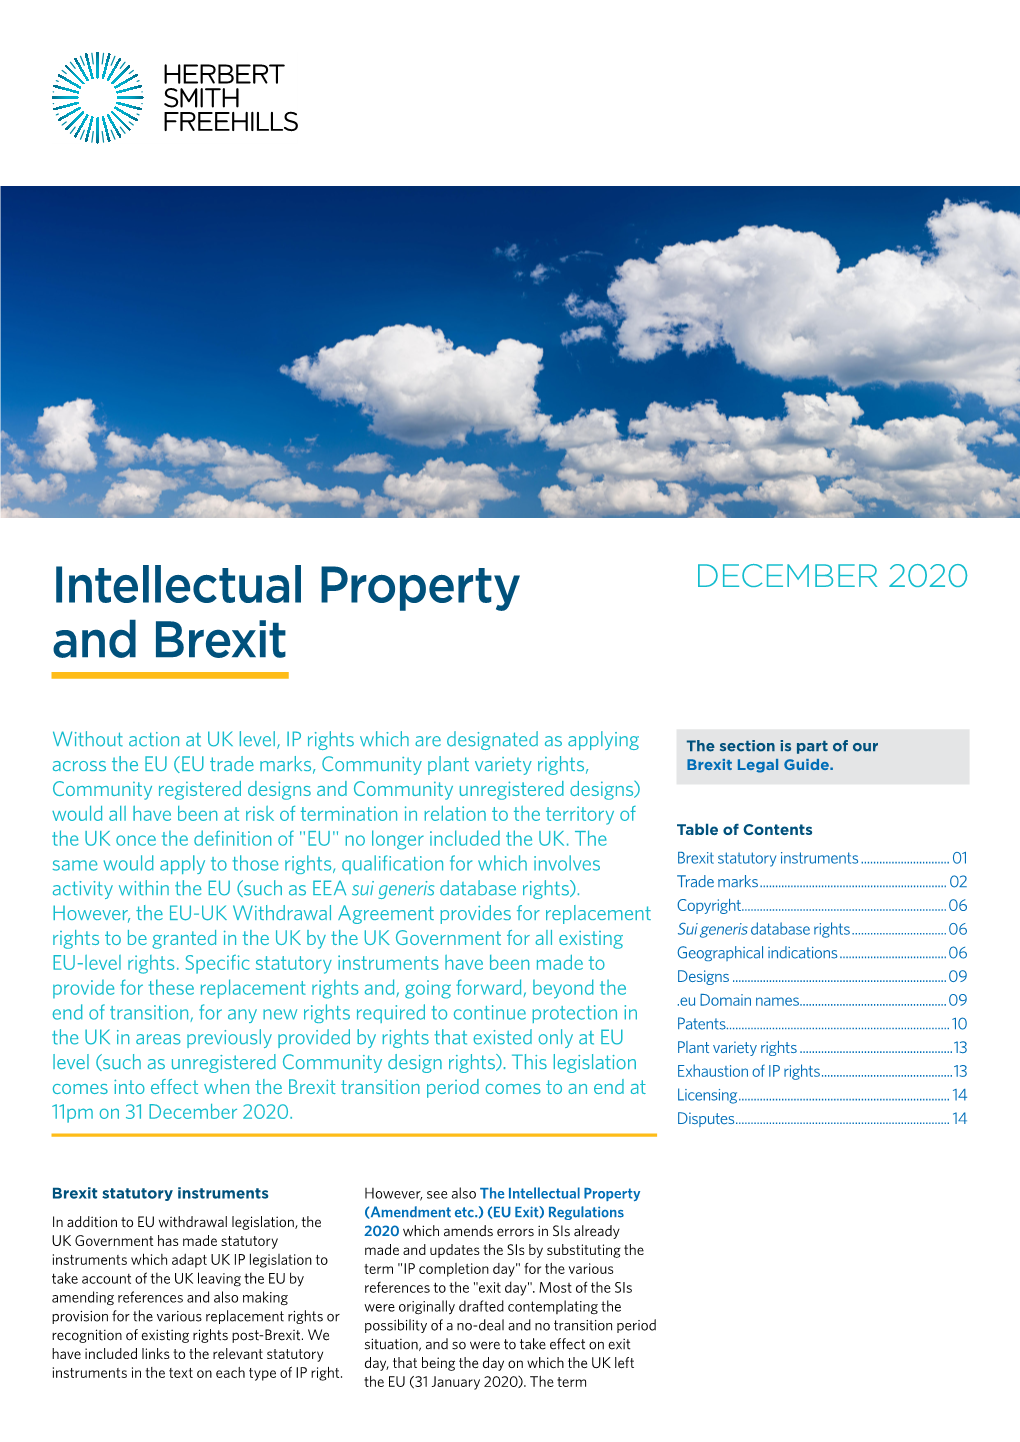 Intellectual Property and Brexit Herbert Smith Freehills